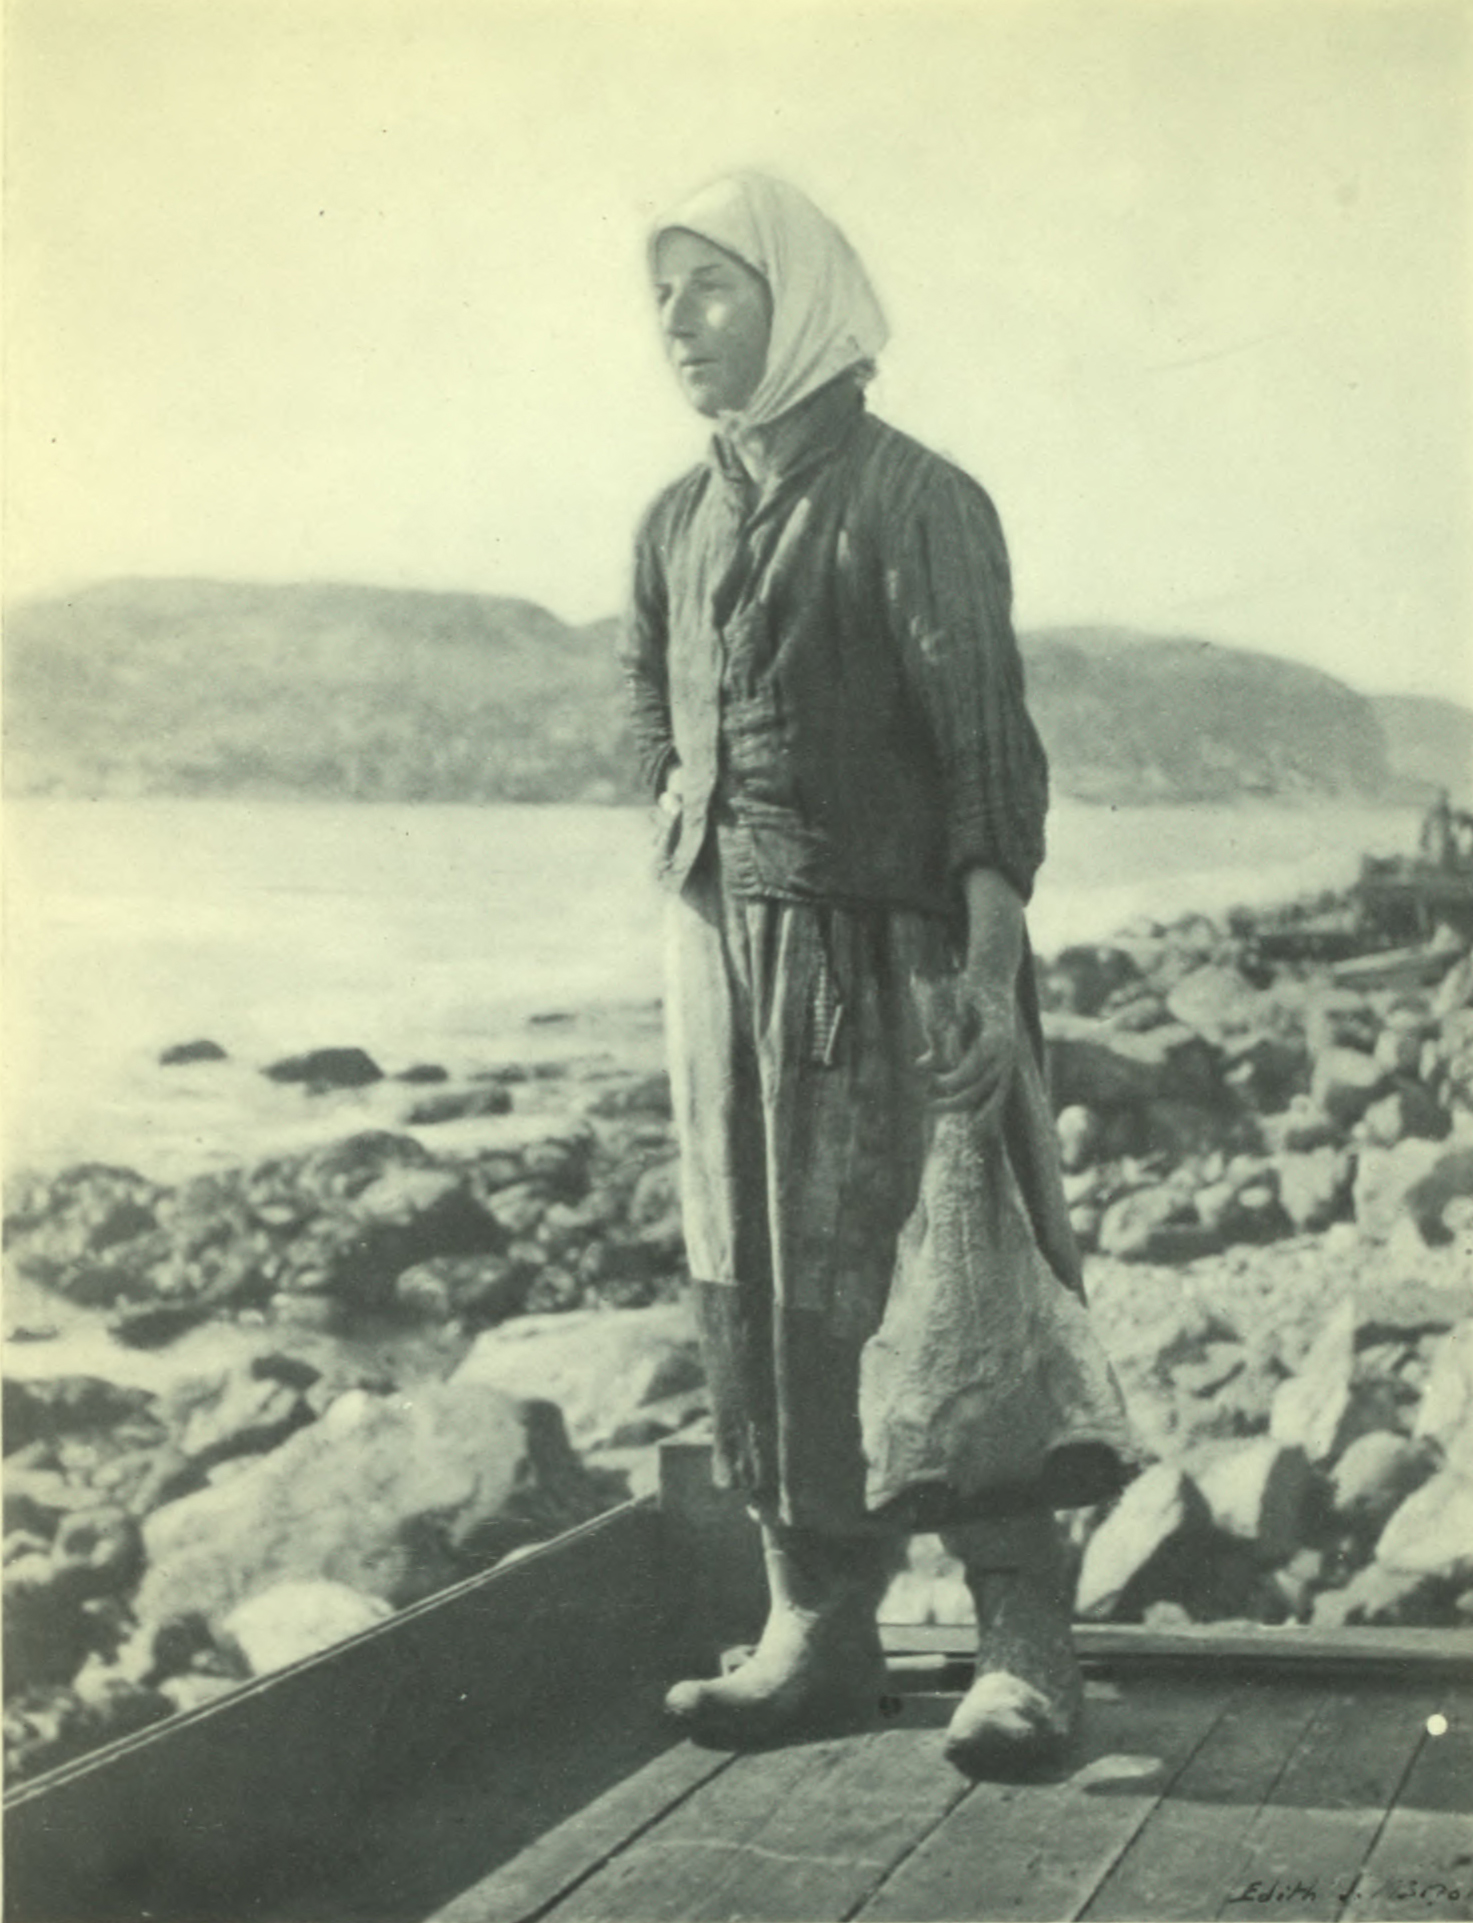 Woman with headscarf, dress, and jacket, standing at the rocky coastline.